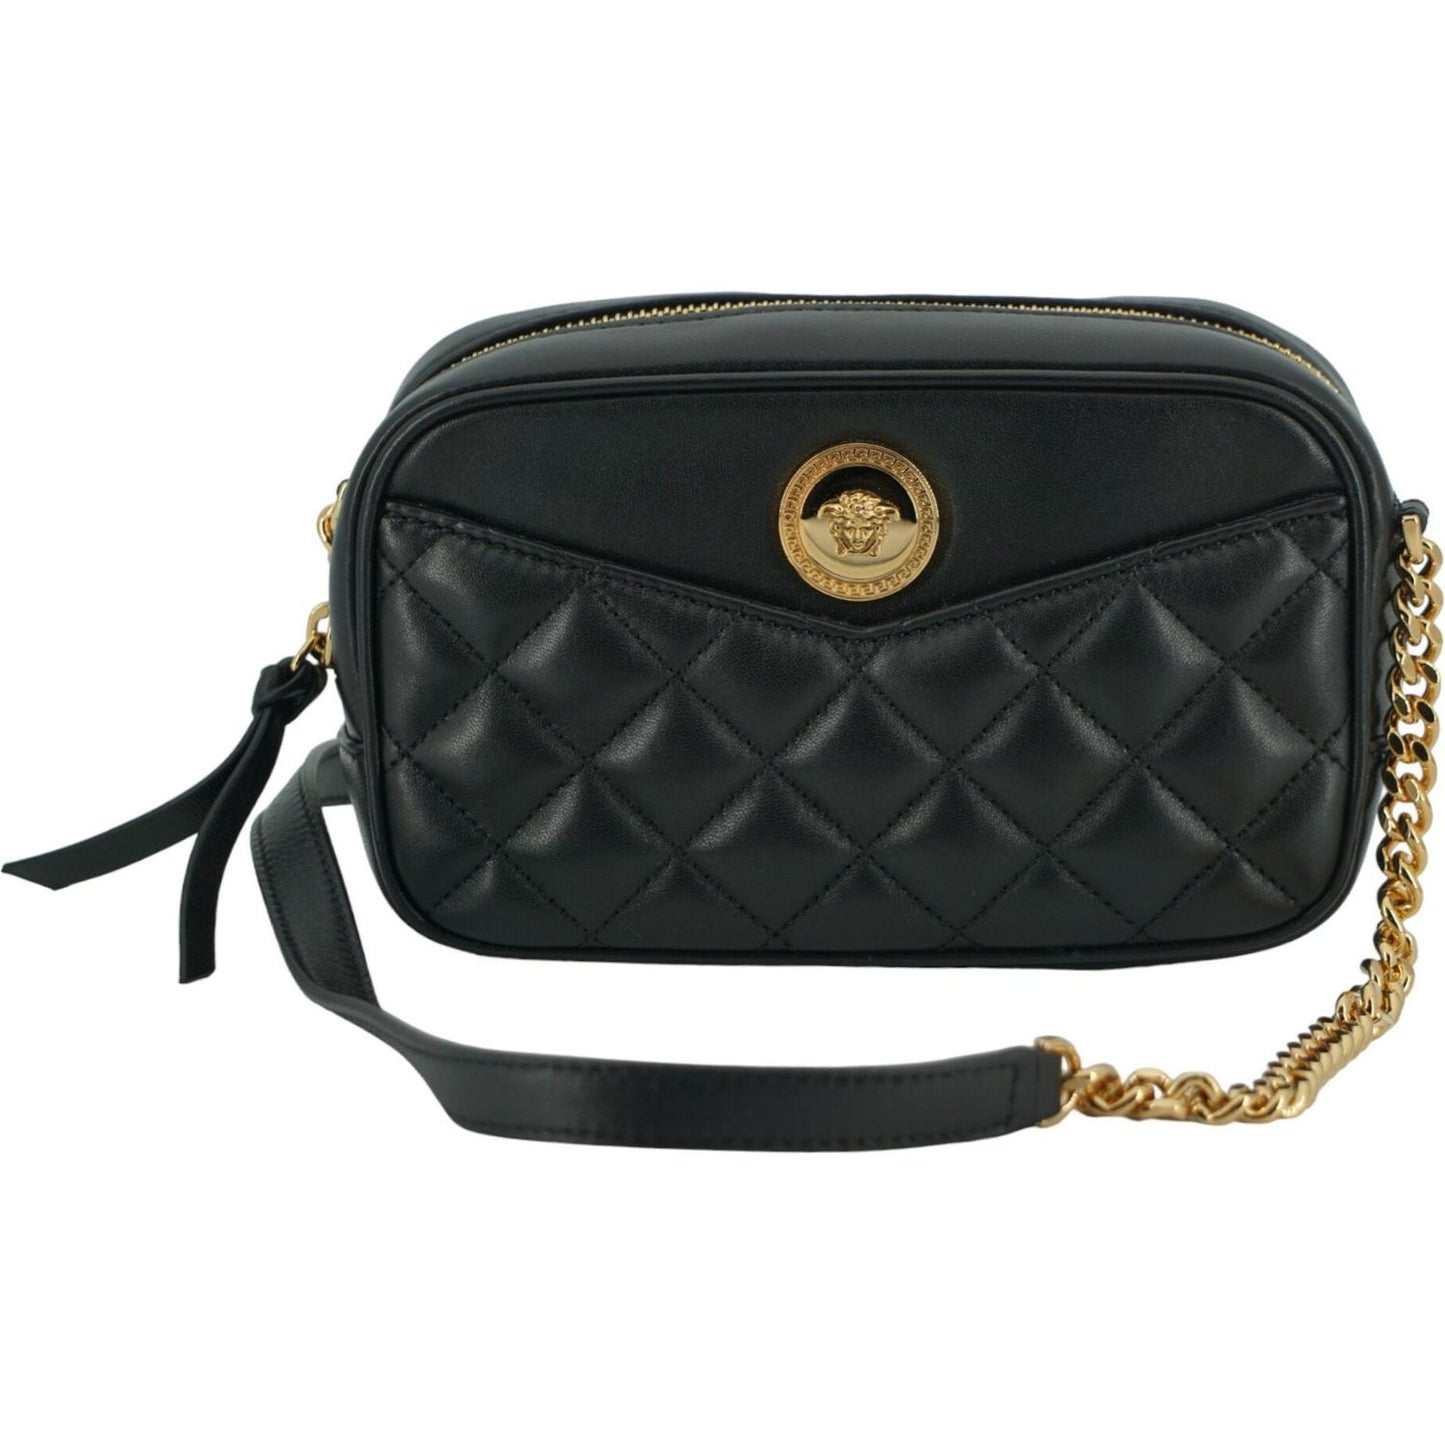 Versace Black Lamb Leather Small Camera Crossbody Bag black-lamb-leather-small-camera-crossbody-bag DSC01150-scaled-d56a7f90-cee.jpg